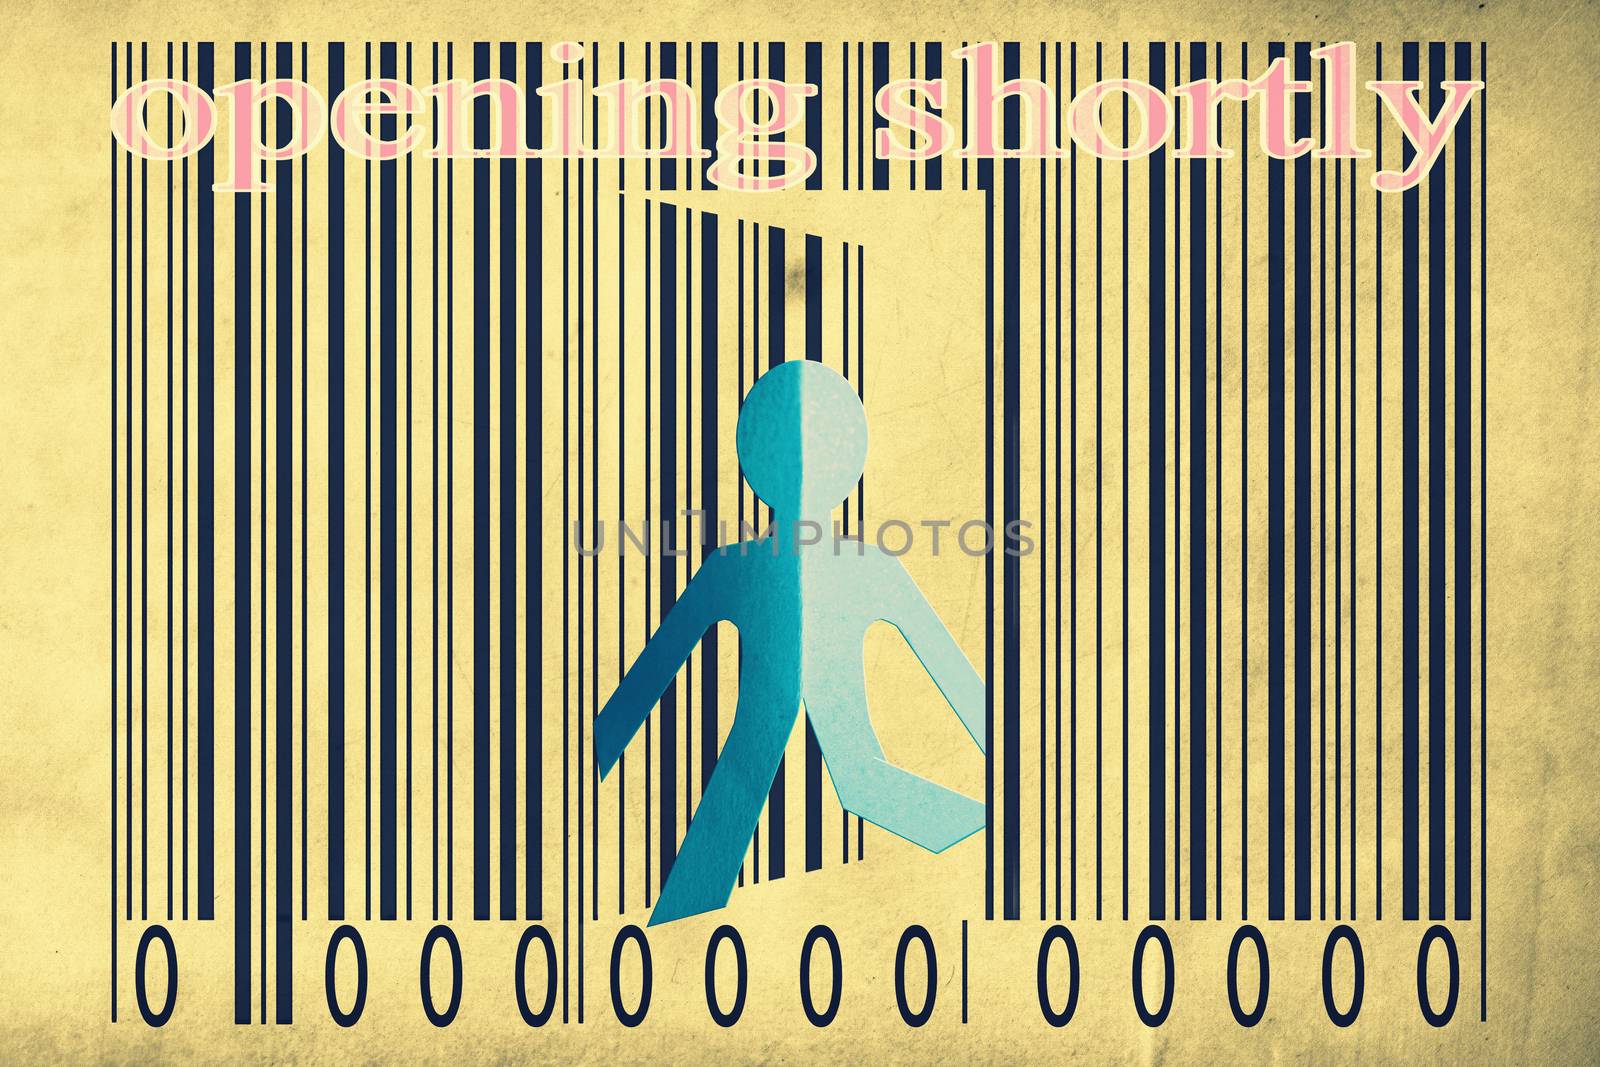 Paperman coming out of a bar code with Opening shortly Words by yands